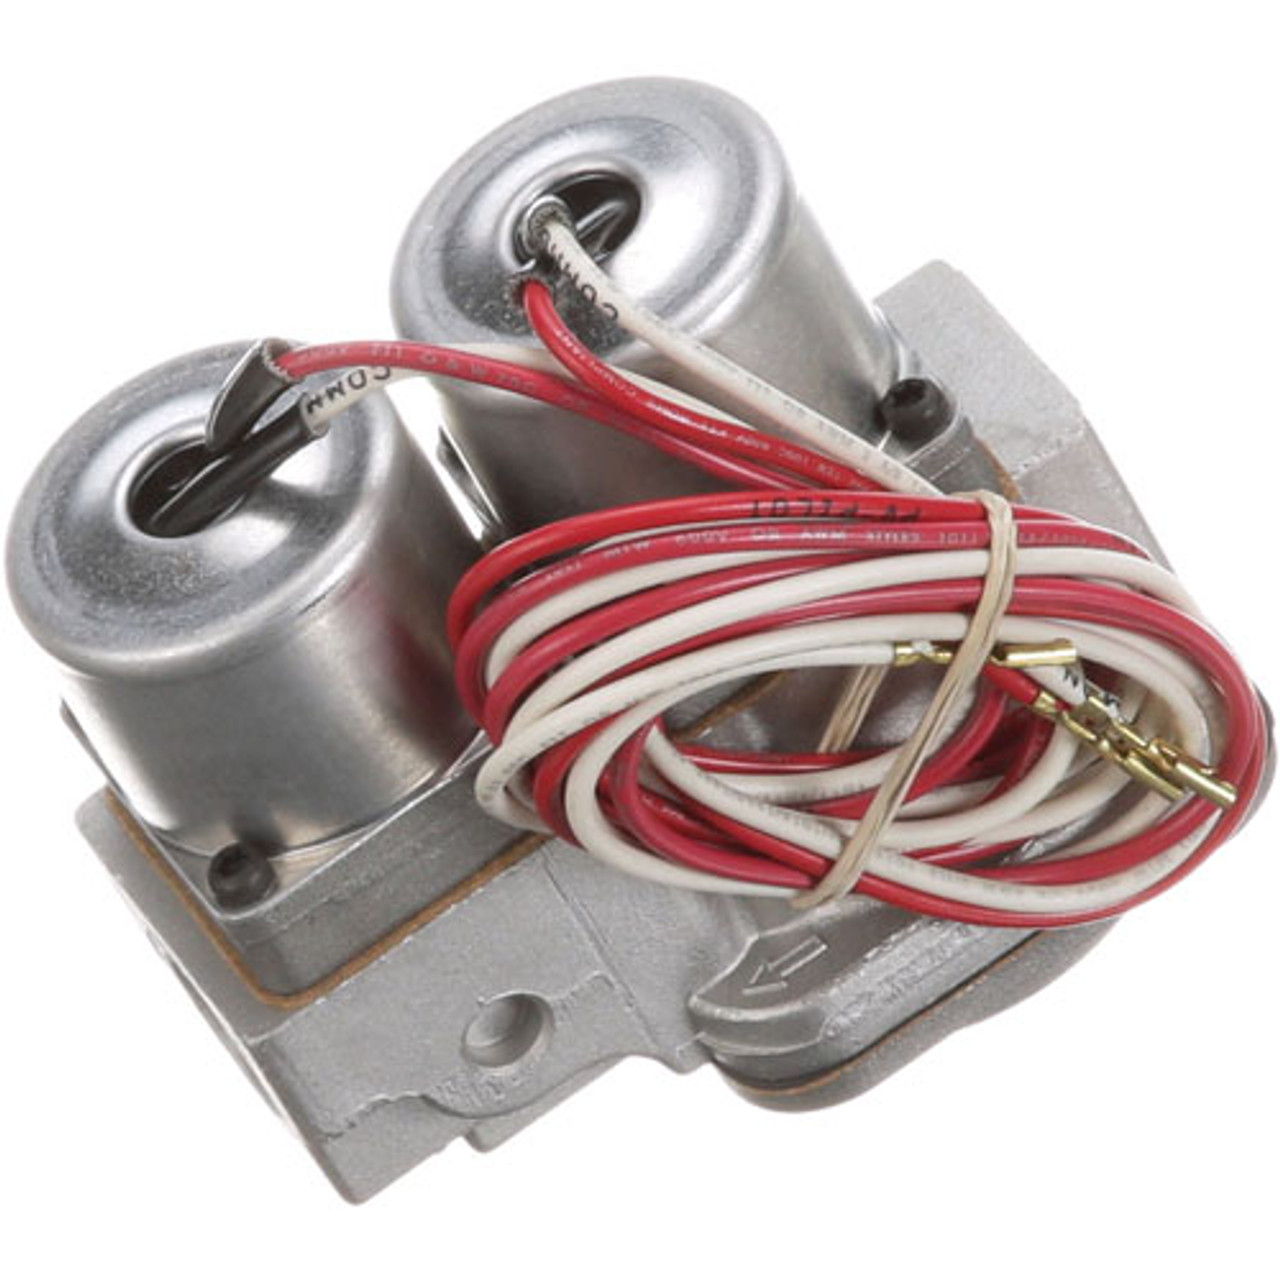 Dual Solenoid Valve 1/2" 25V - Replacement Part For Johnson Controls G96HGA-1